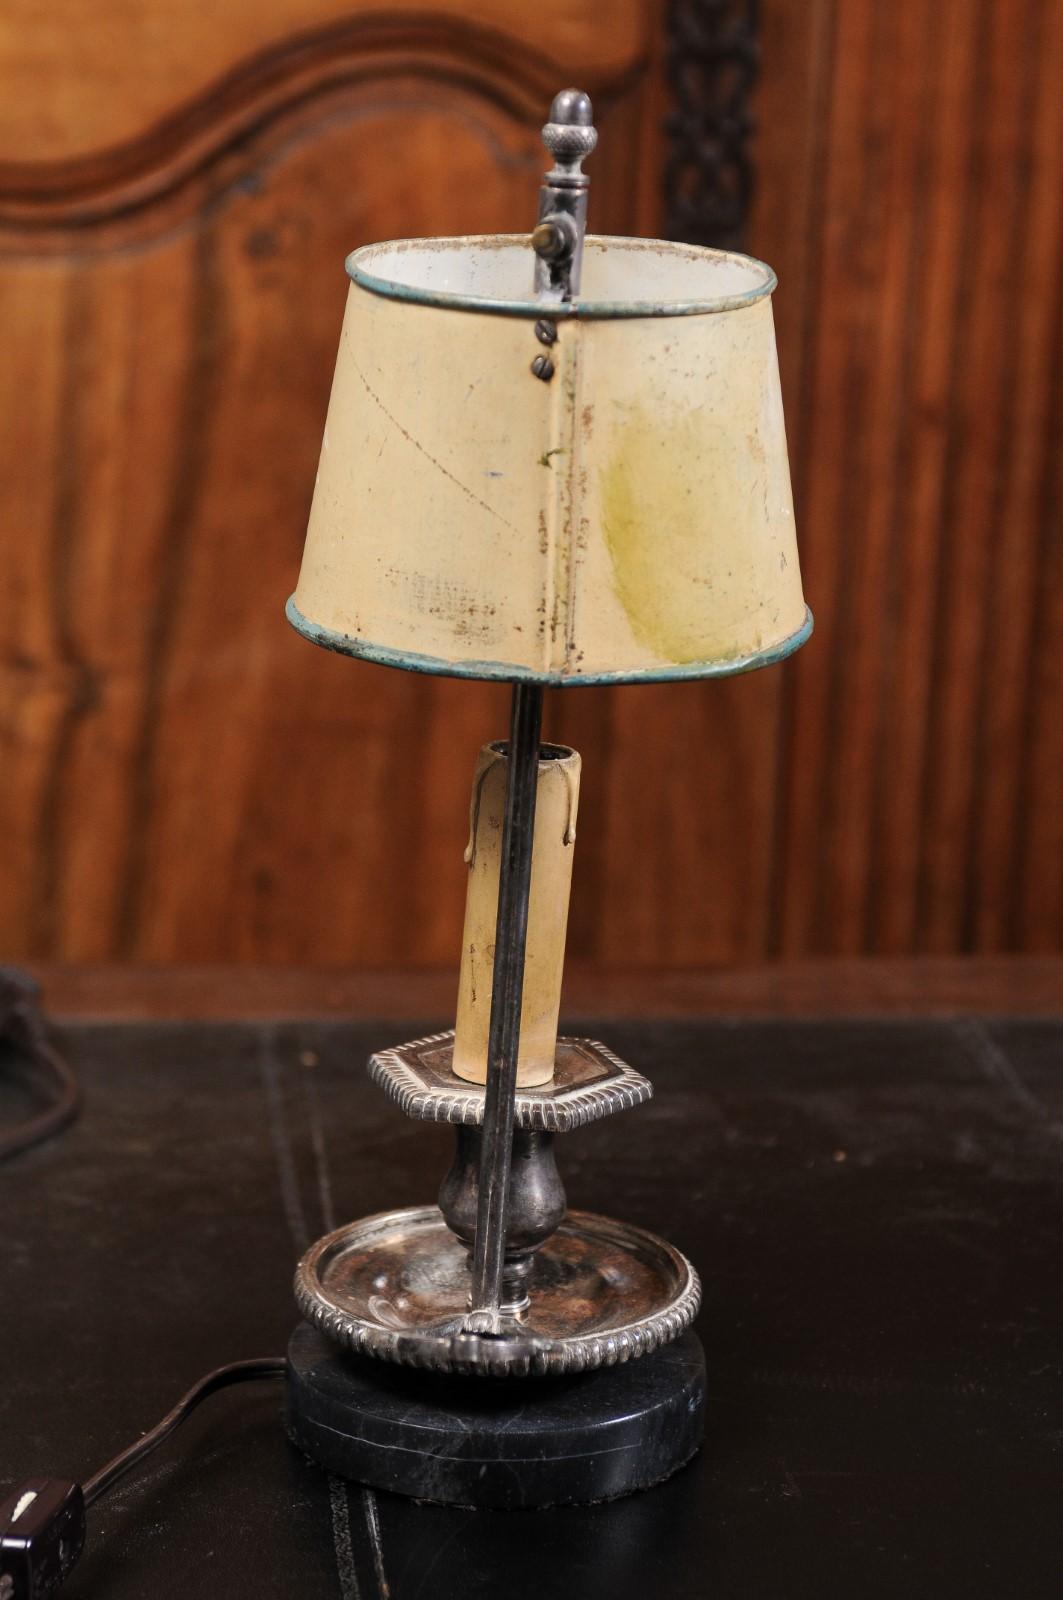 A French tôle lamp from the 19th century, with original hand-painted shade. Created in France during the 19th century, this tôle lamp features its original hand-painted adjustable shade adorned with a ribbon-tied bouquet, protecting a single light.